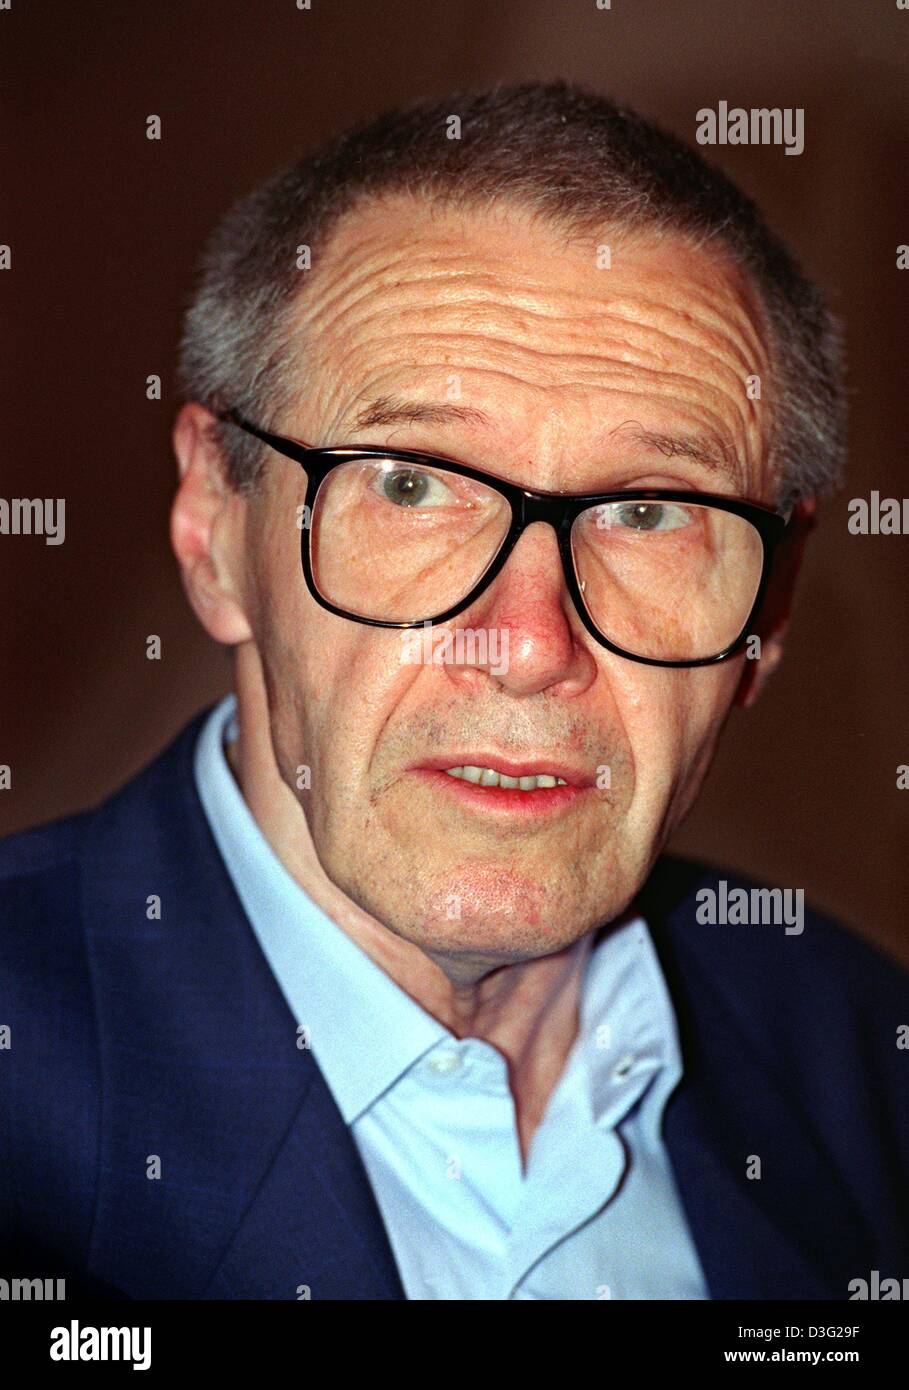 (dpa files) - Hungarian composer Gyorgy Kurtag pictured during an interview in Munich, 18 June 1998. Gyorgy Kurtag was born at Lugos (Lugoj), Romania, on 19 February 1926. In 1968 he was appointed professor of chamber music, a post he held until his retirement in 1986. Kurtag was active especially in the field of chamber music and is often named the successor of Bela Bartok. Stock Photo